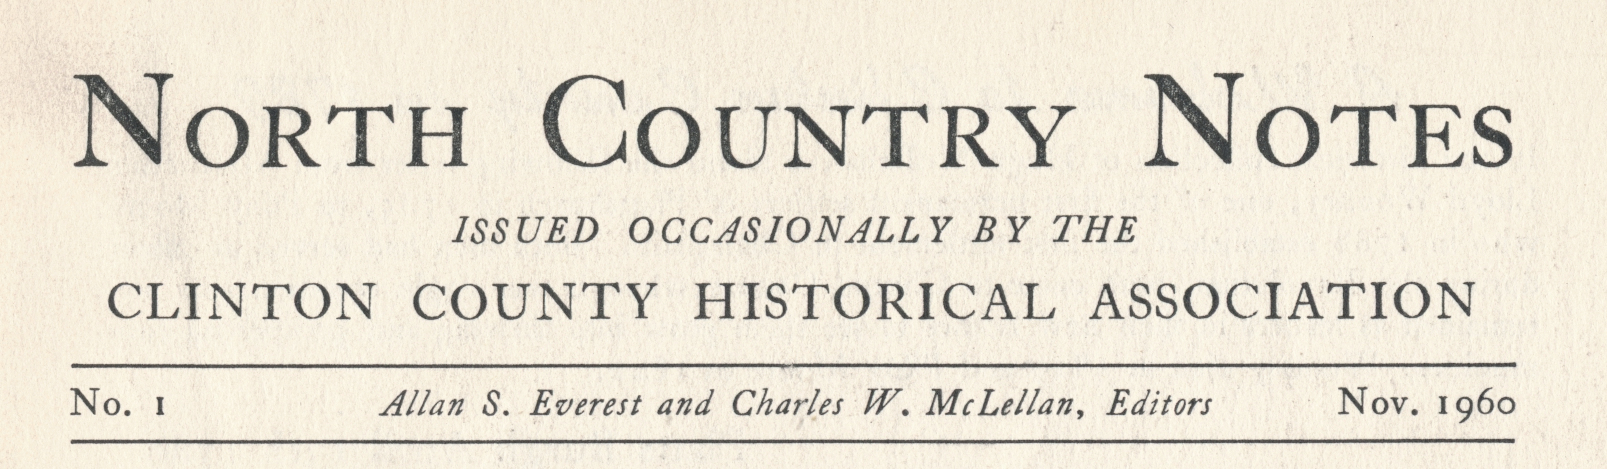 North Country Notes by CCHA vol 1 no 1-1960
                    printed by the Moorsfield Press